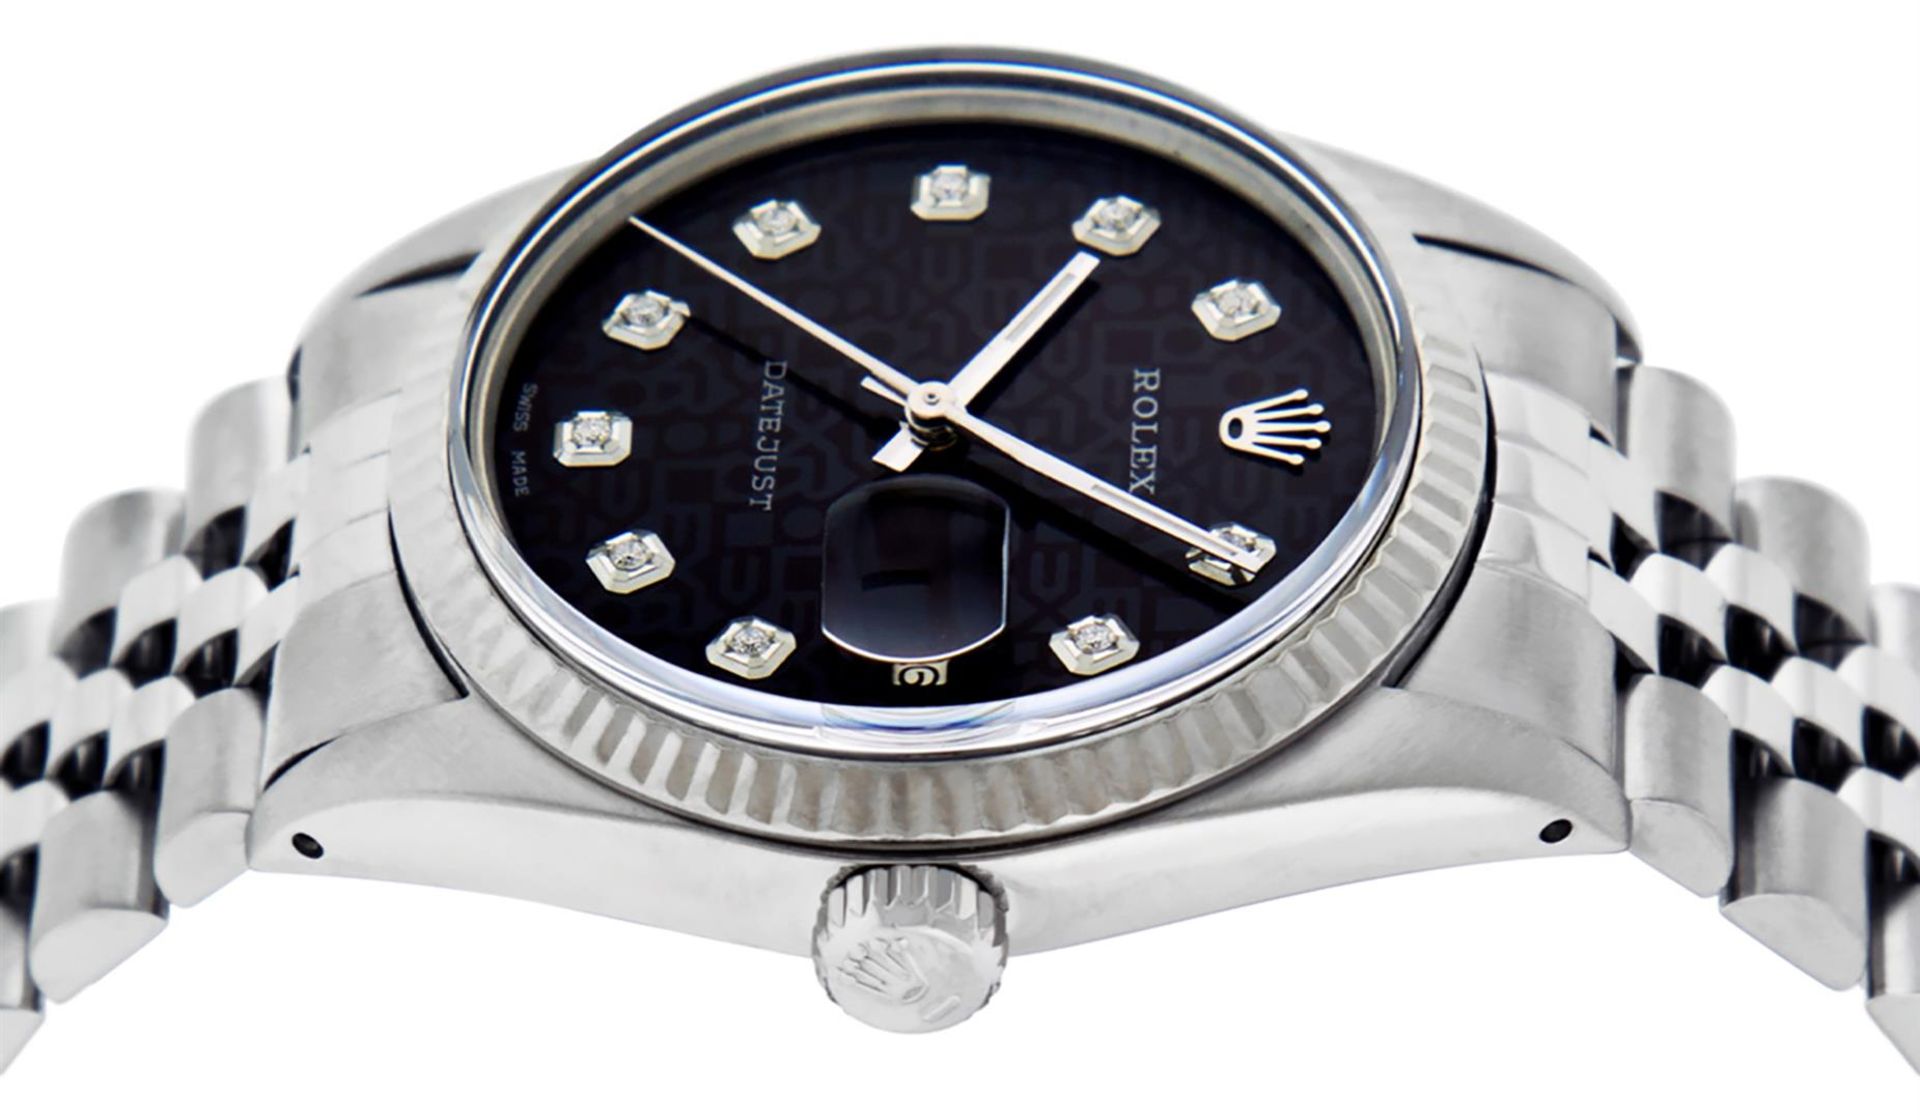 Rolex Mens 36 Stainless Black Diamond Oyster Perpetual Datejust Wristwatch - Image 9 of 9